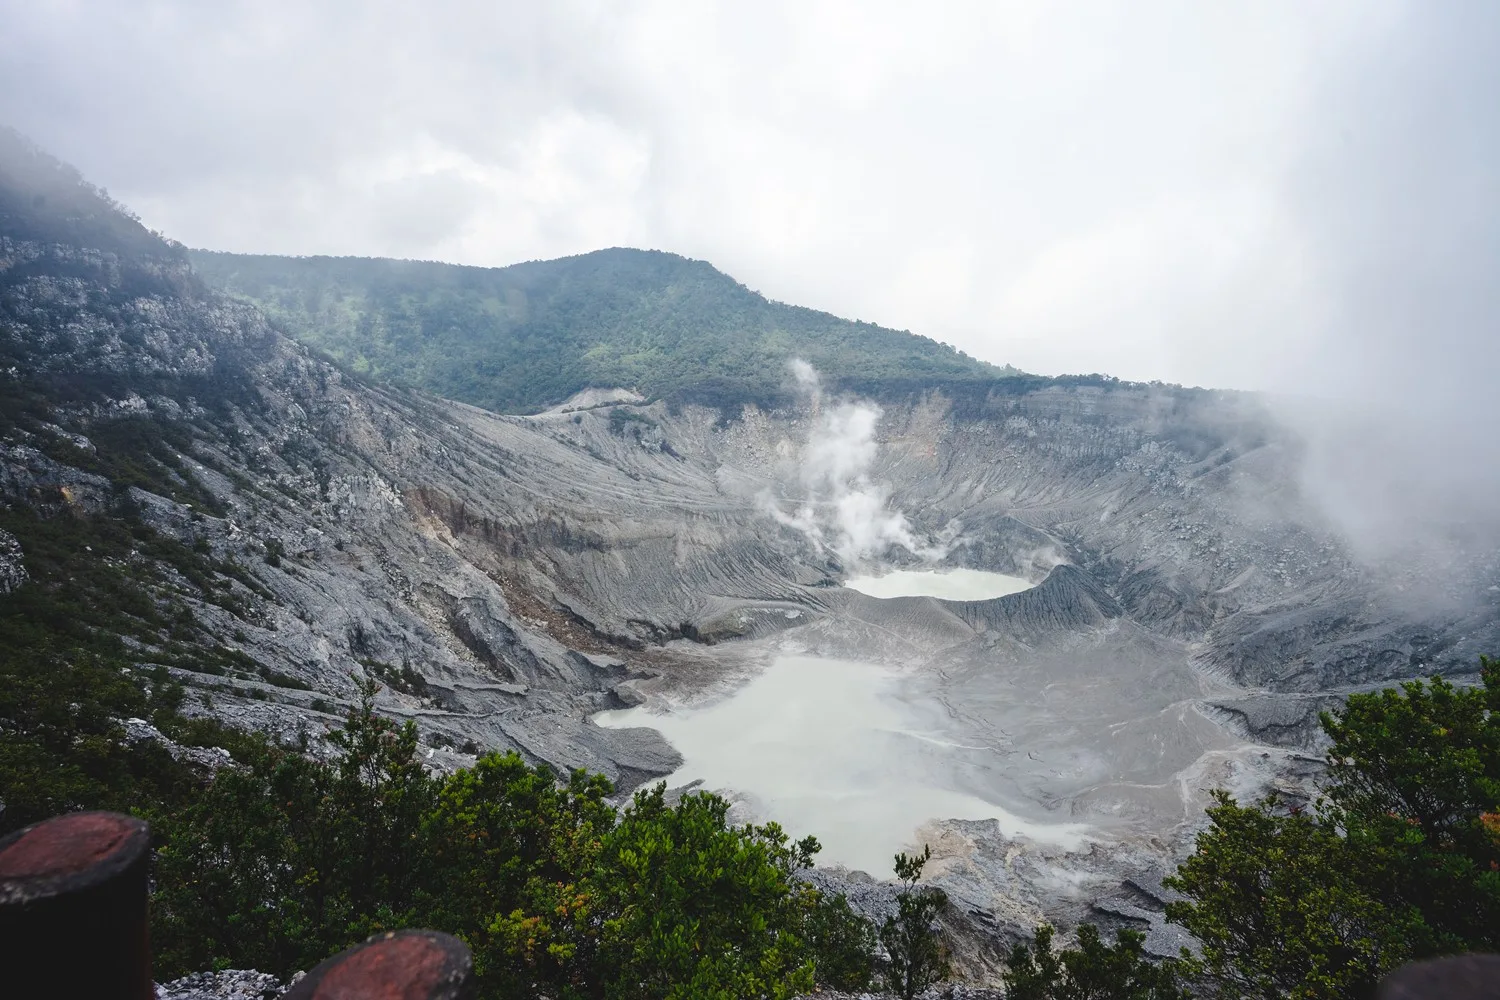 places to go in Bandung - 48-Hour Adventurous Itinerary in Lembang, West Java - Mount Tangkuban Parahu